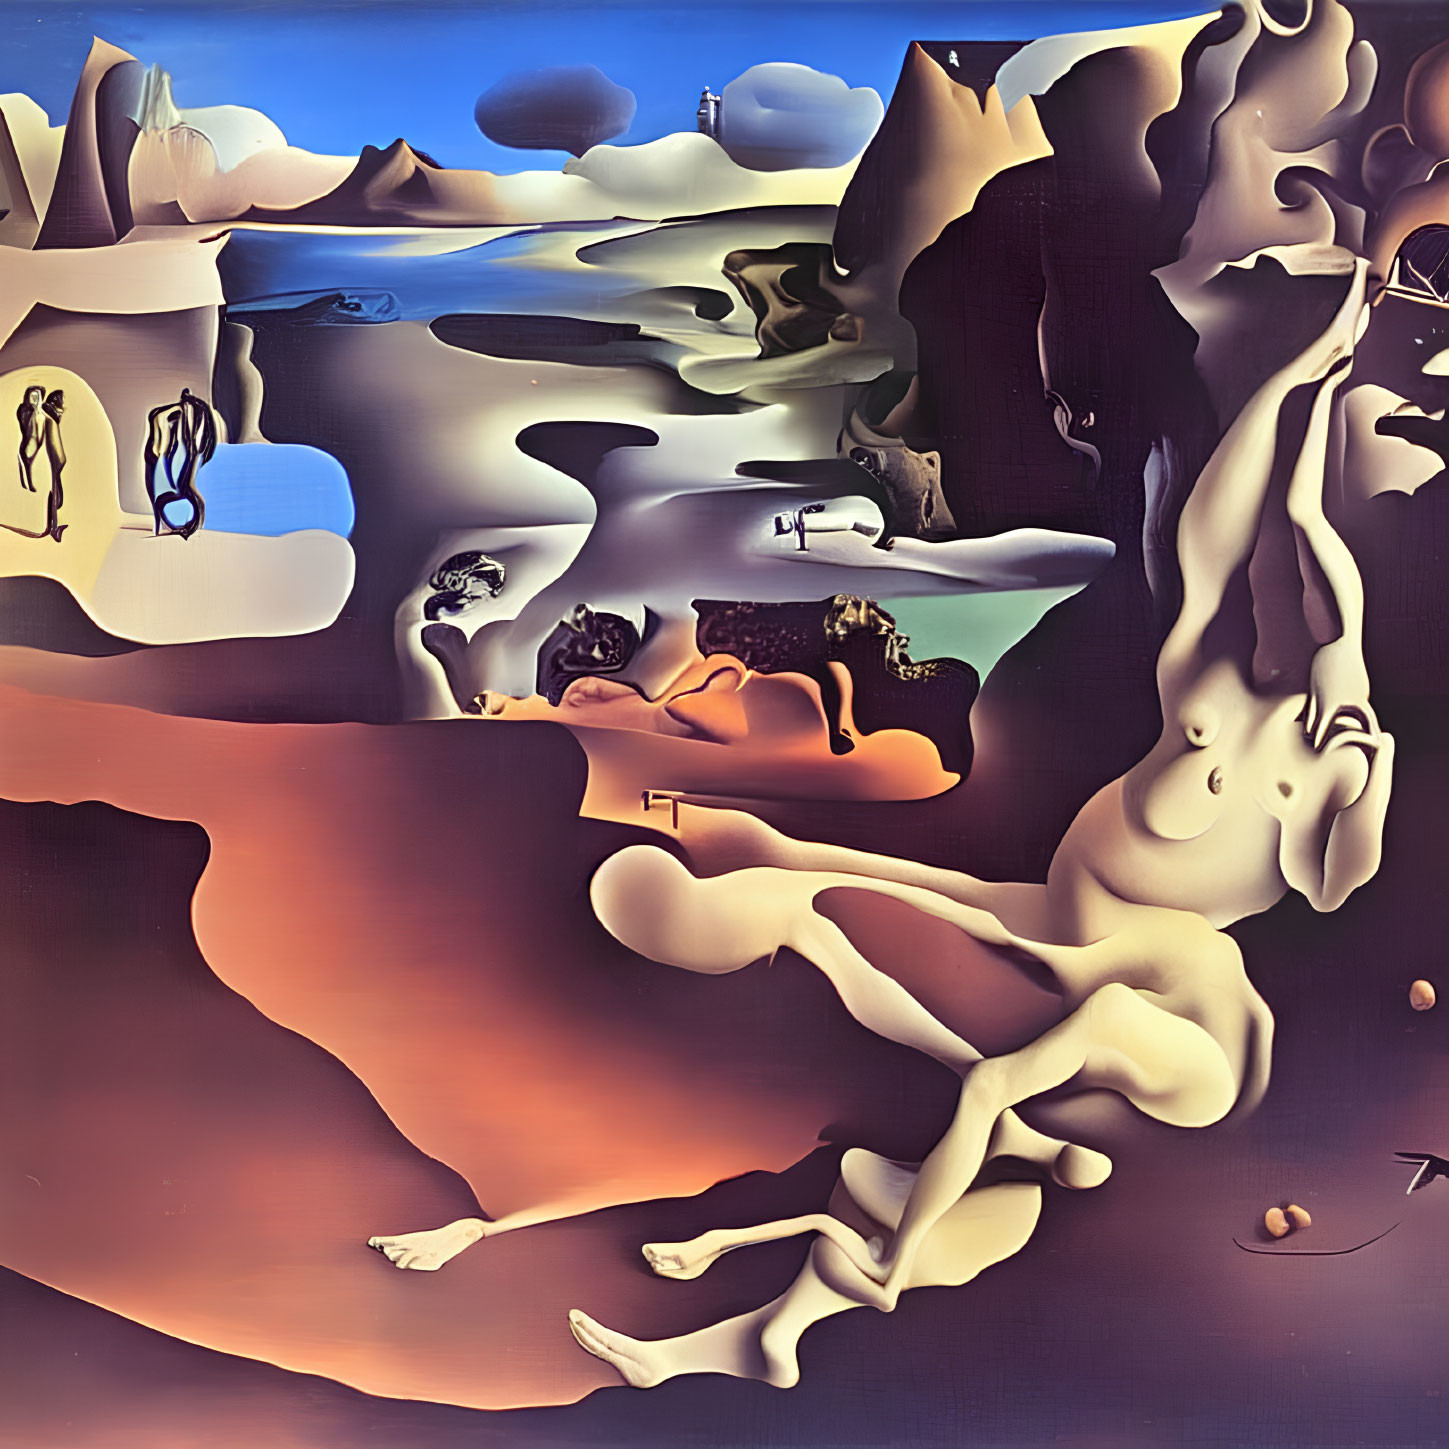 Abstract surreal landscape with melting shapes and distorted perspectives in warm tones